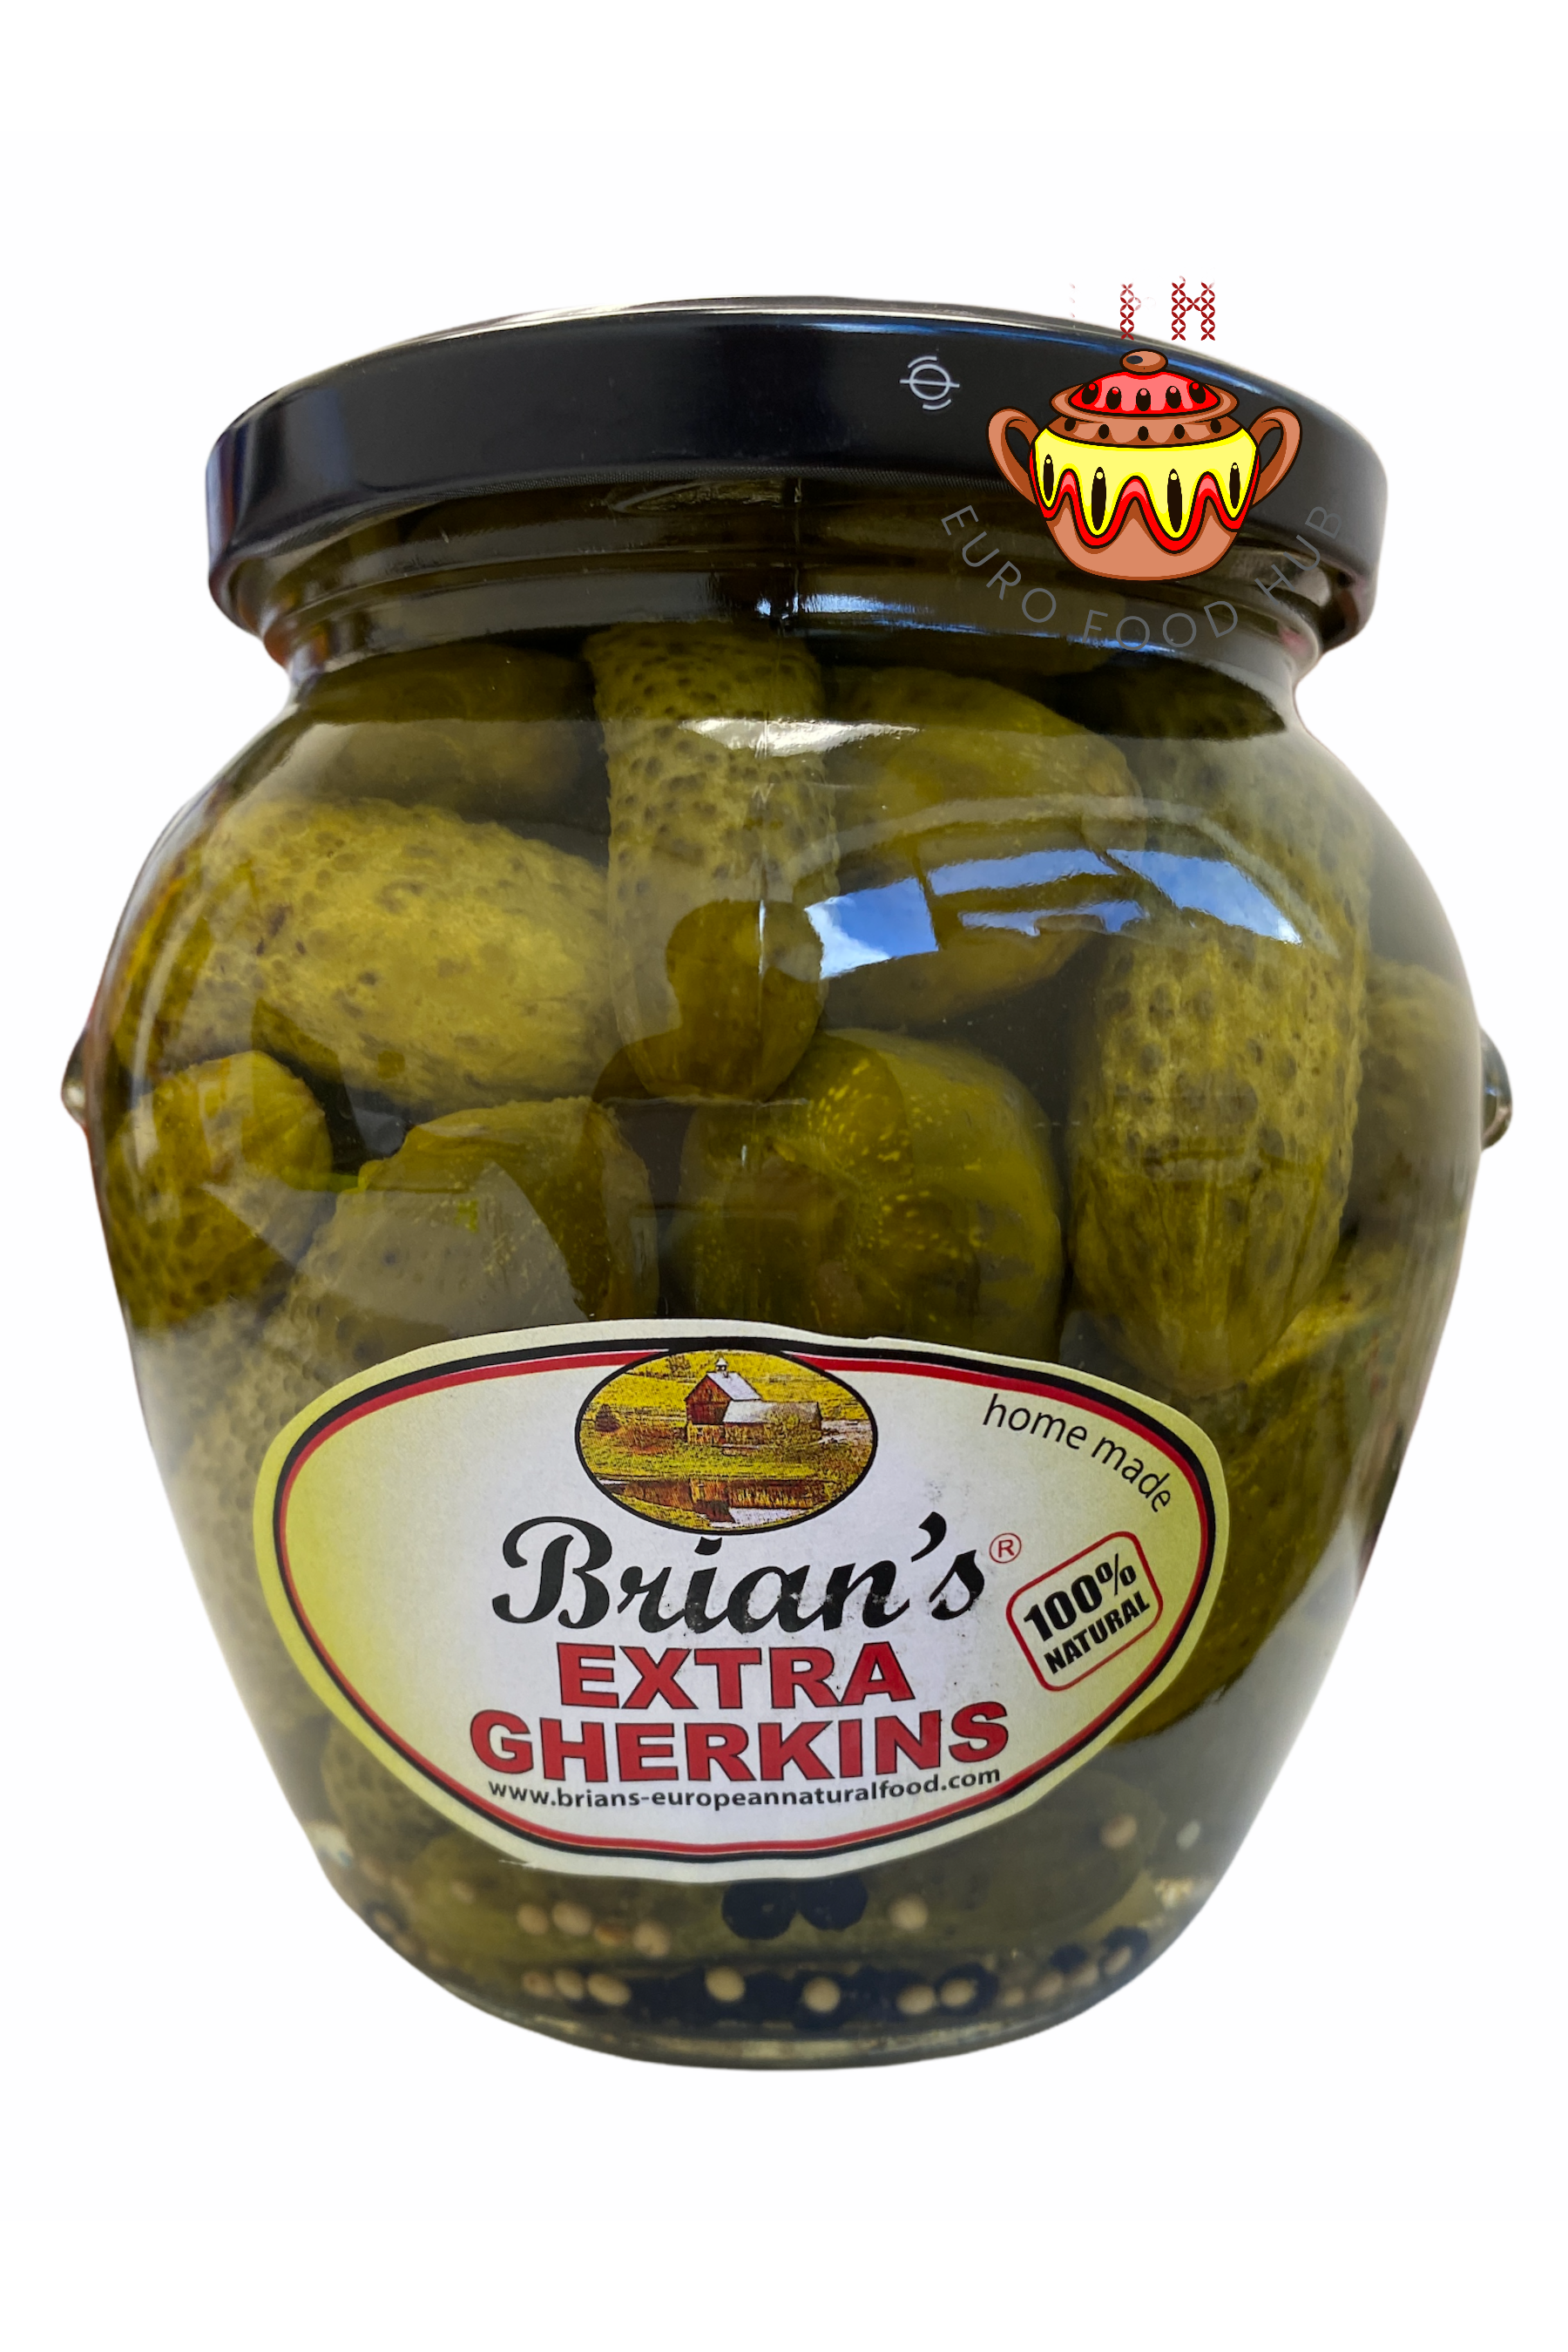 Brian's EXTRA GHERKINS - Pickles - 550g